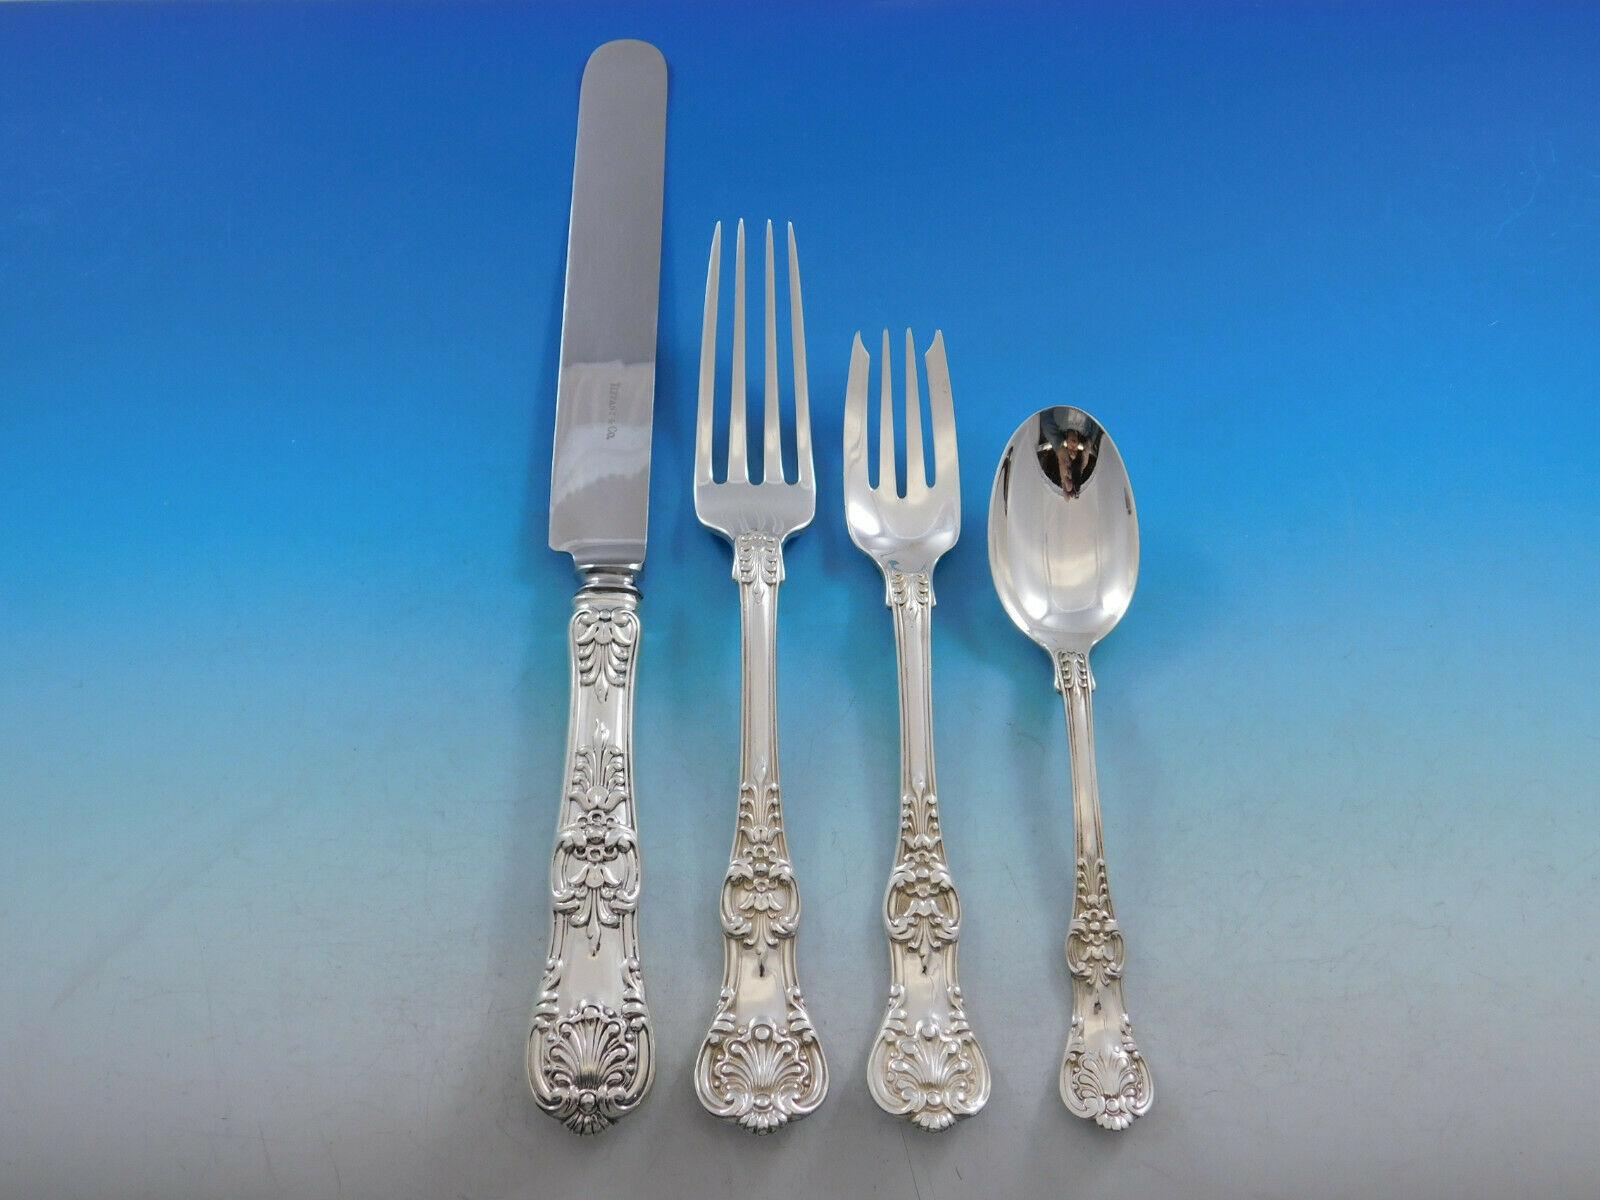 English King by Tiffany & Co. sterling silver flatware set, 51 pieces. This set includes:

8 dinner size knives, 10 1/8